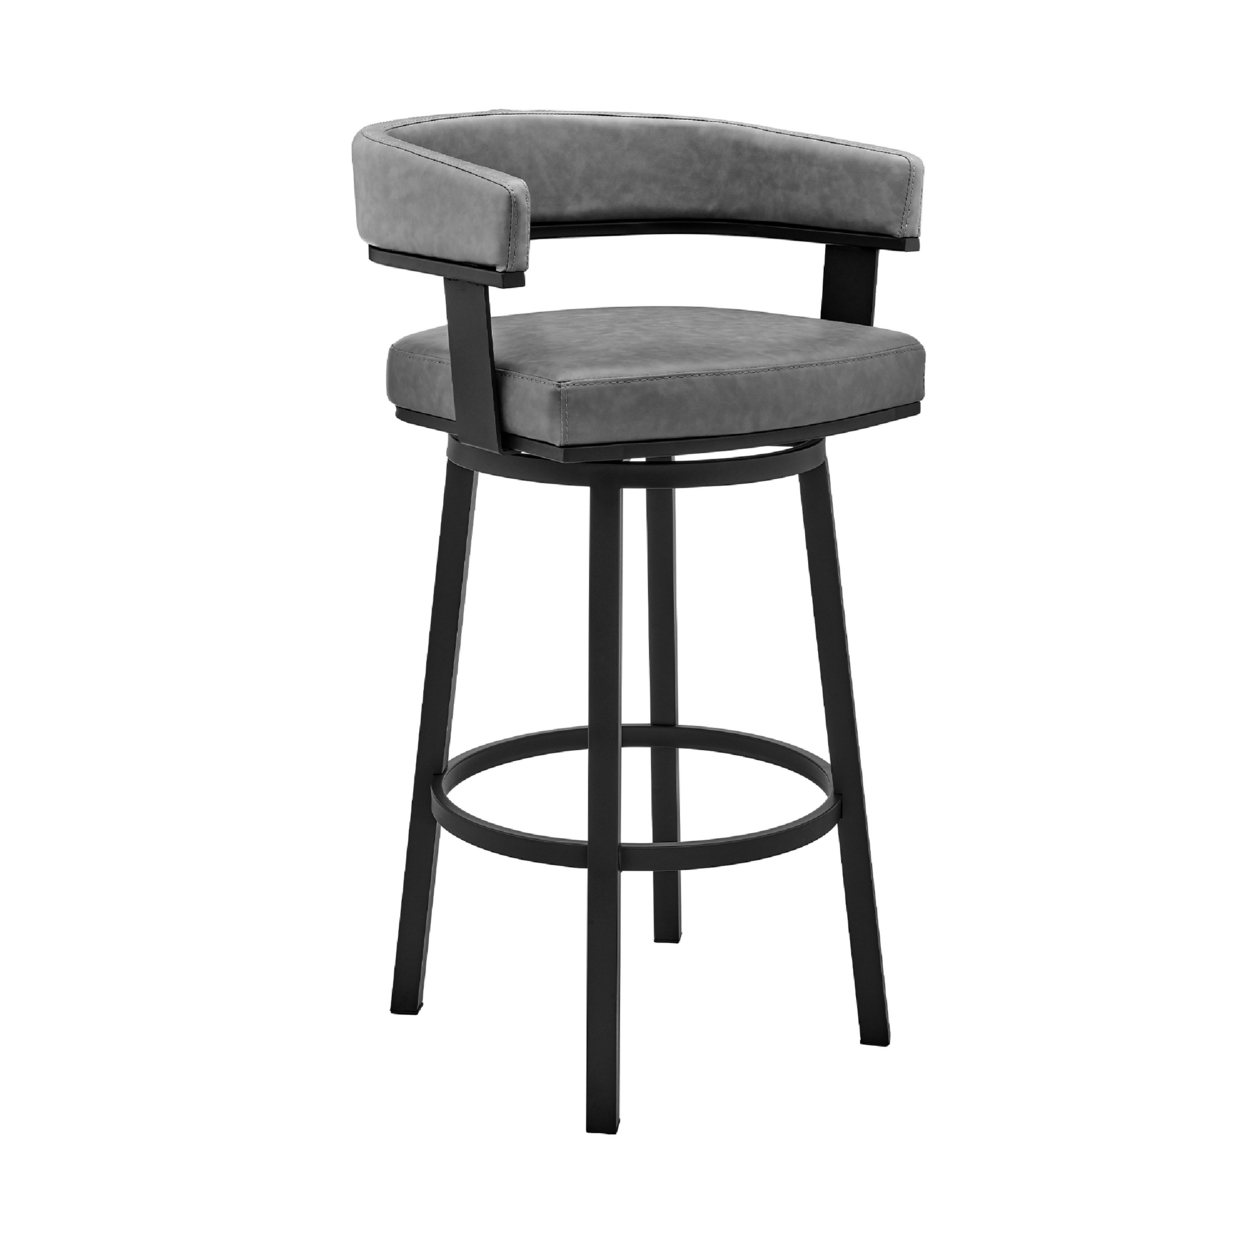 Swivel Barstool With Curved Open Back And Metal Legs, Black And Gray- Saltoro Sherpi